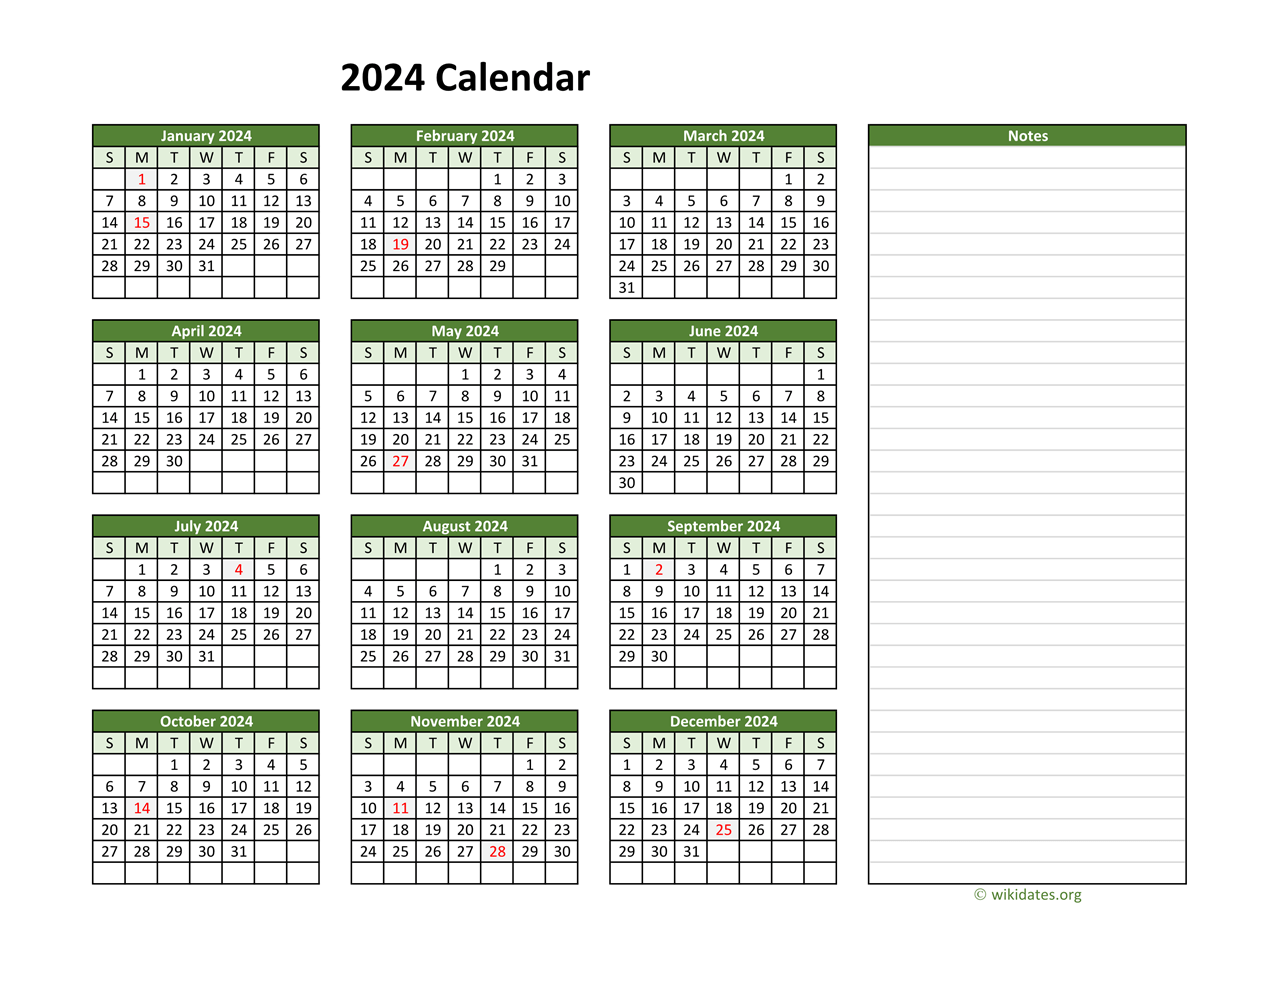 Yearly Printable 2024 Calendar With Notes | Wikidates for 2024 Calendar Printable With Notes